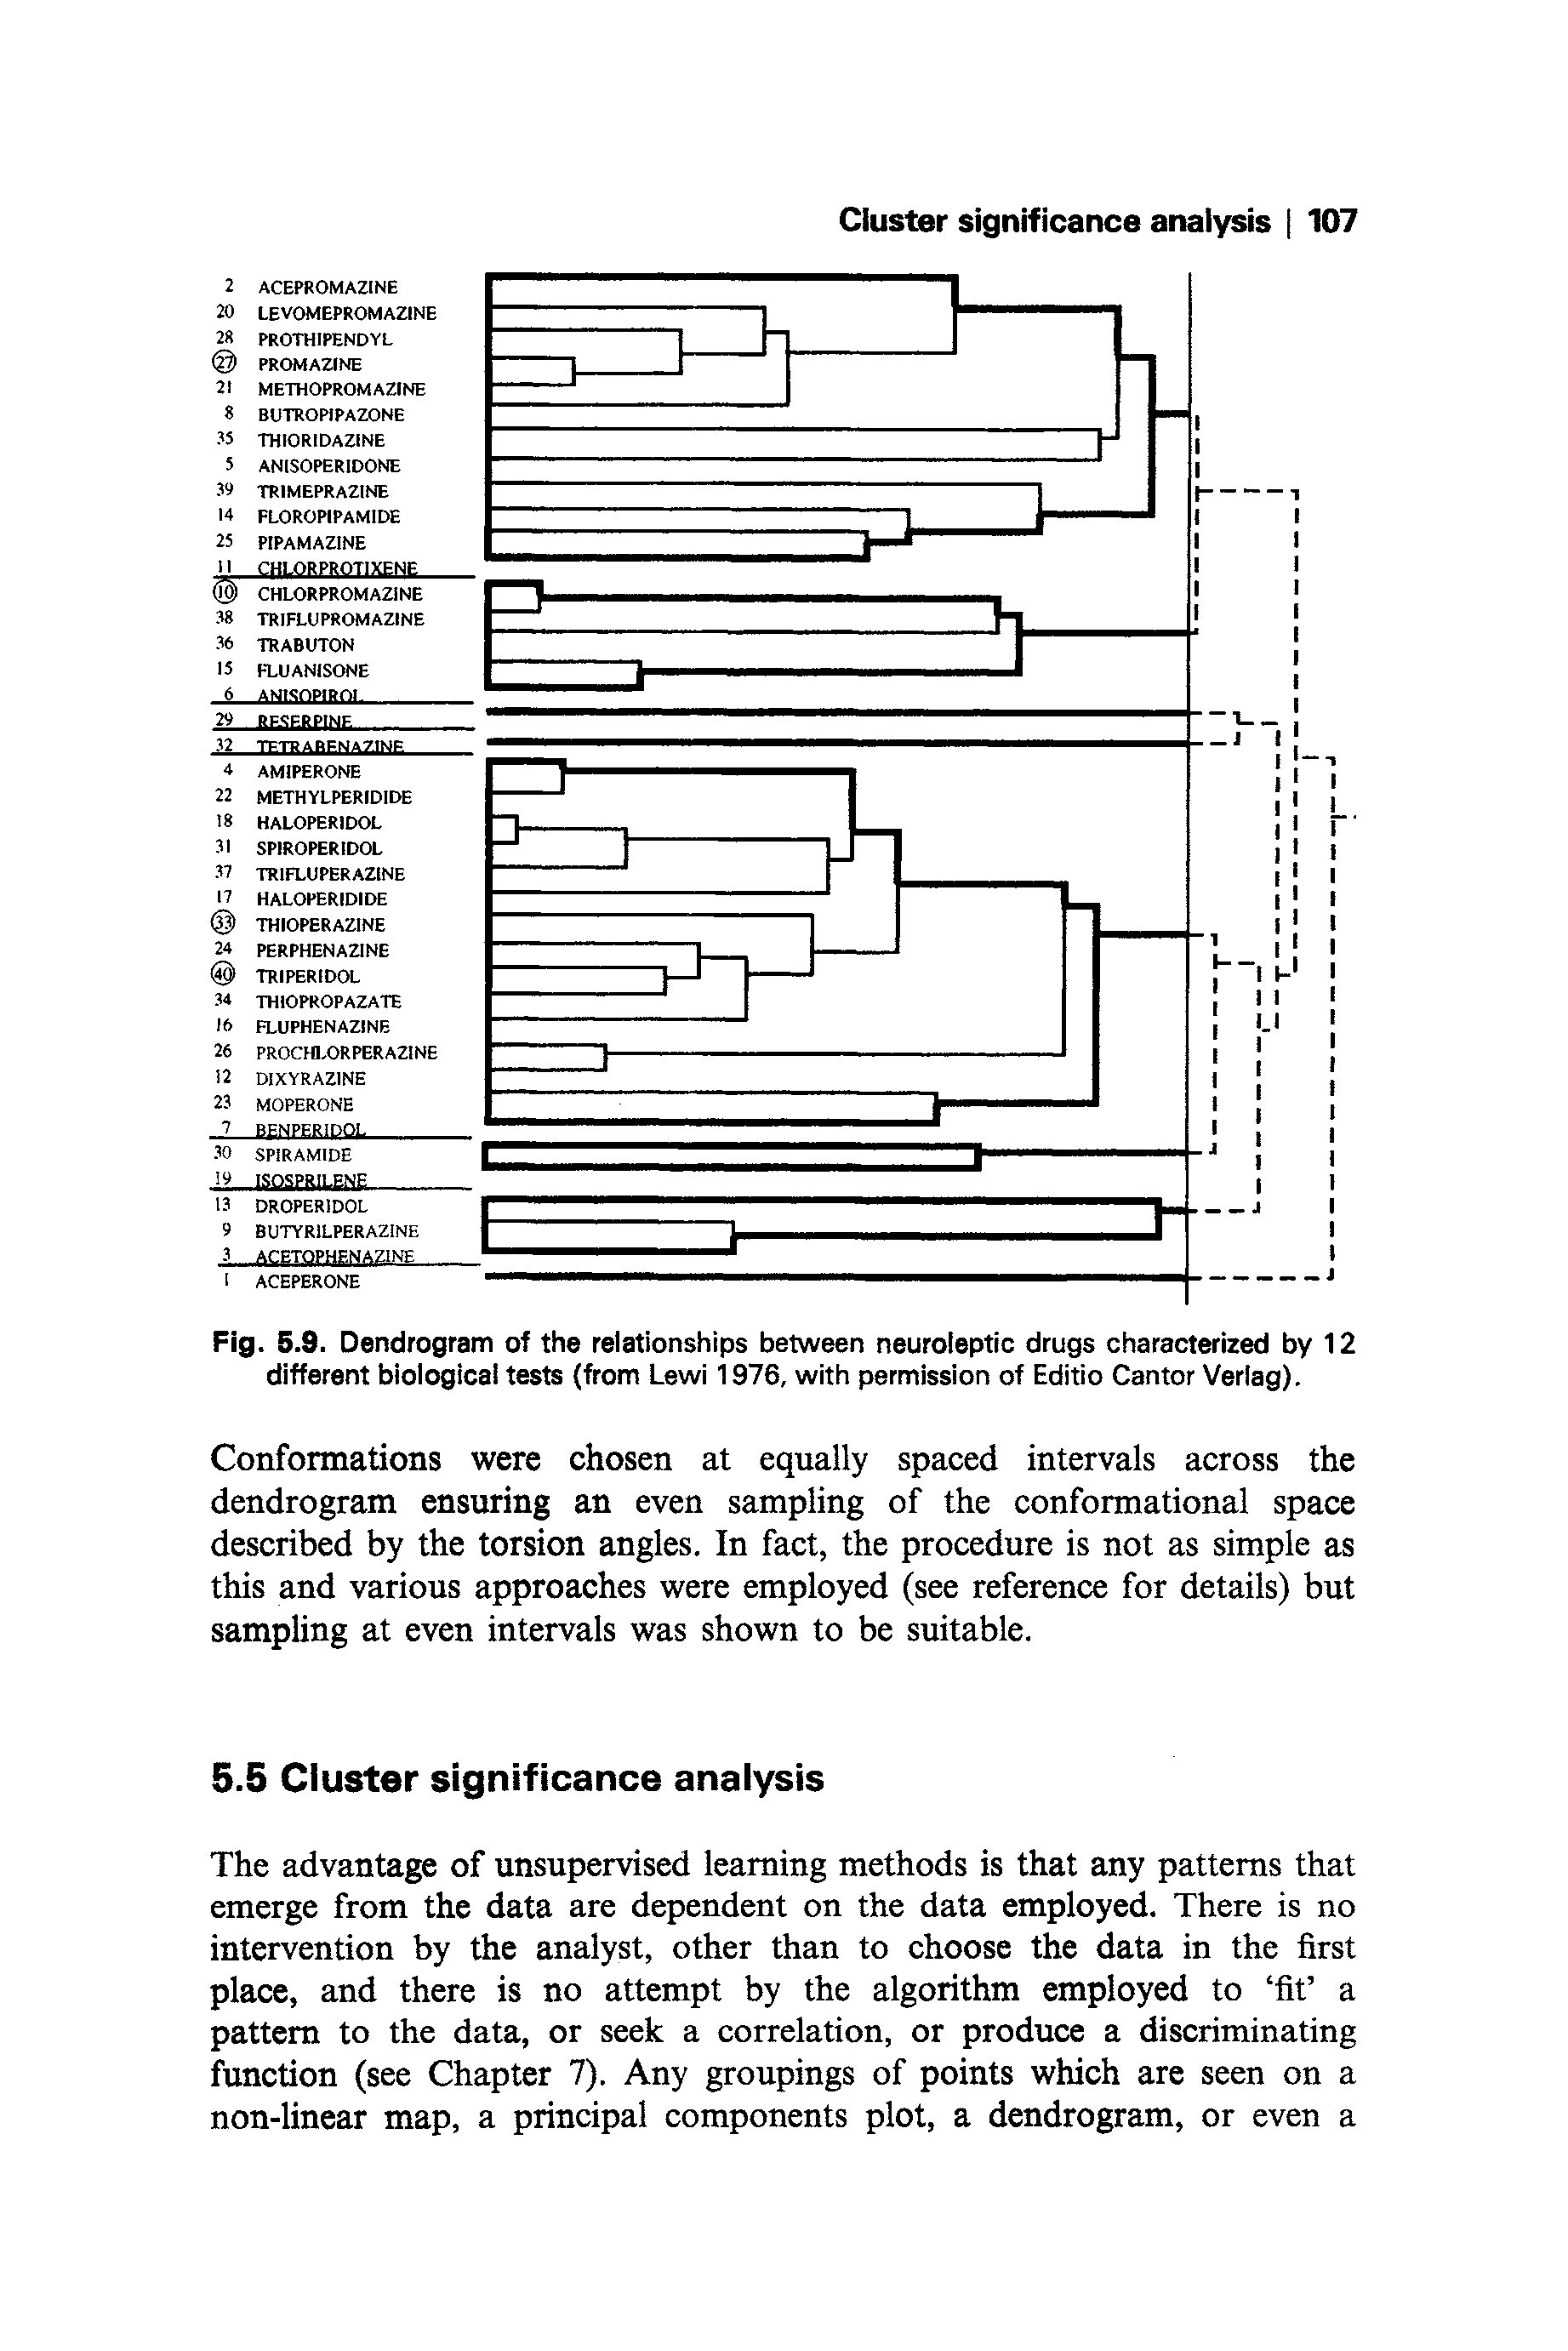 Fig. 5.9. Dendrogram of the relationships between neuroleptic drugs characterized by 12 different biological tests (from Lewi 1976, with permission of Editio Cantor Verlag).